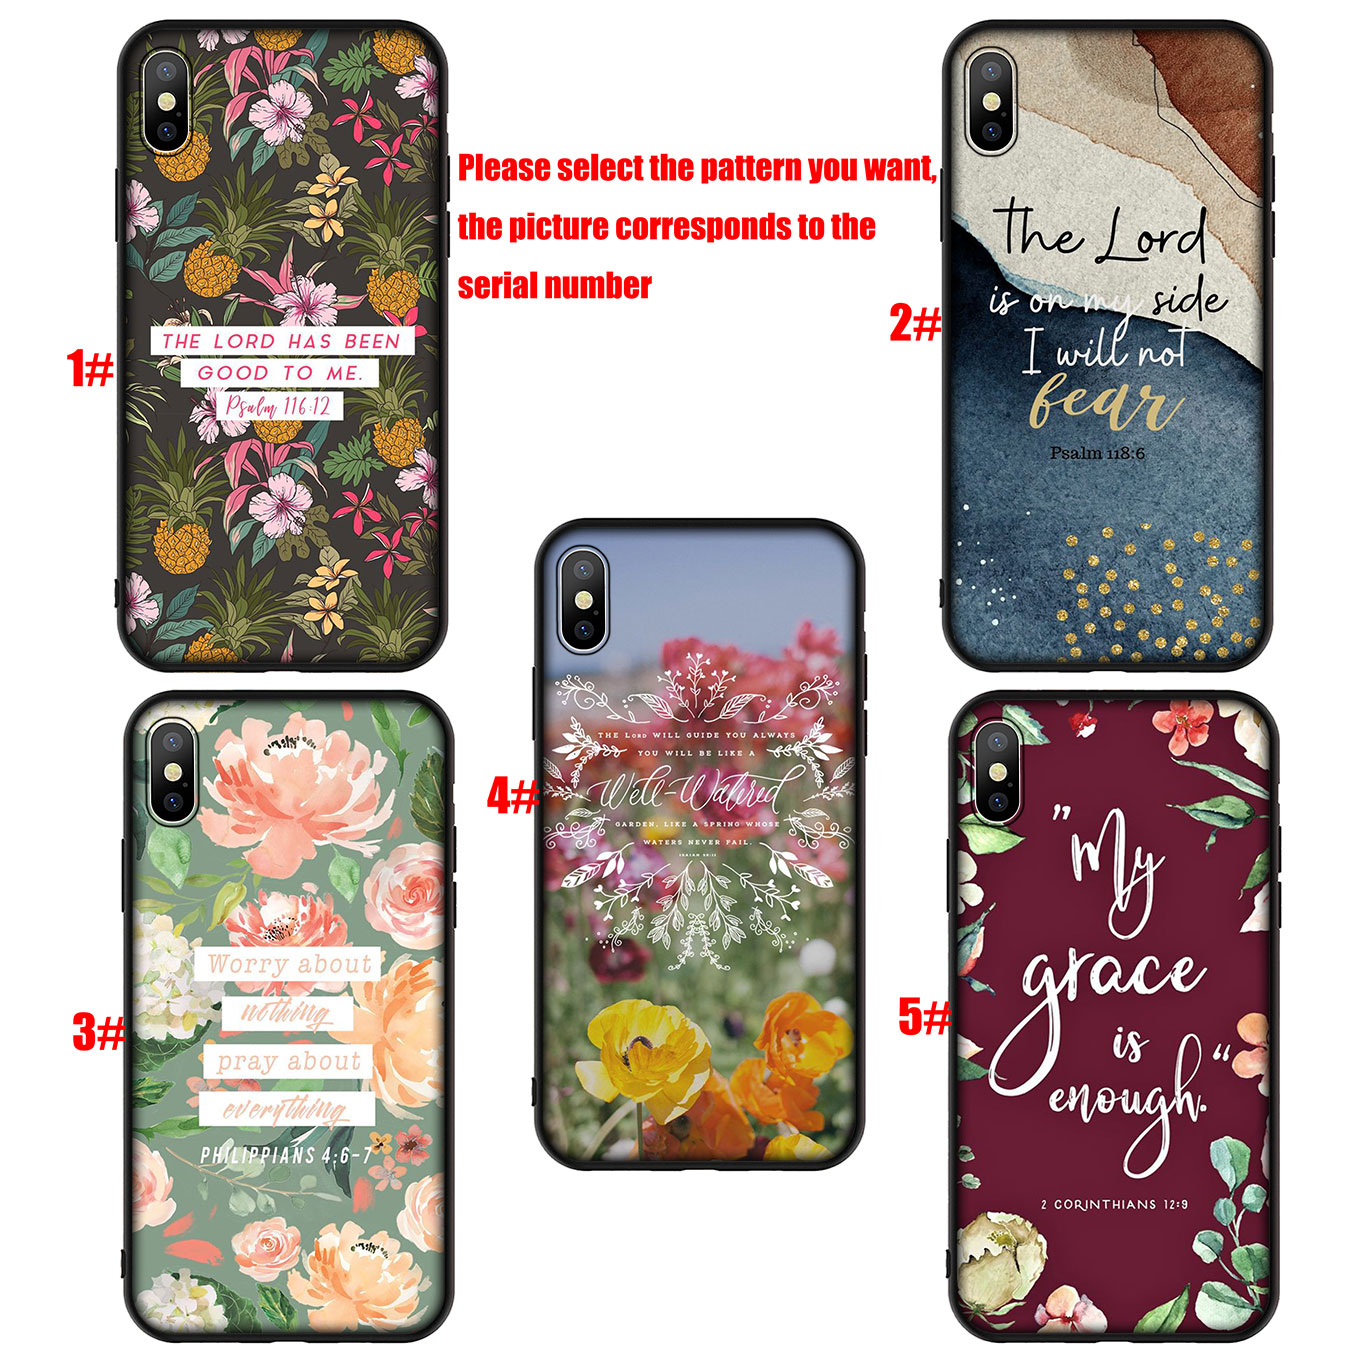 Samsung Galaxy A9 A8 A7 A6 Plus J8 2018 + A21S A70 M20 A6+ A8+ 6Plus Phone Case Soft Silicone Casing B93 Bible Verse